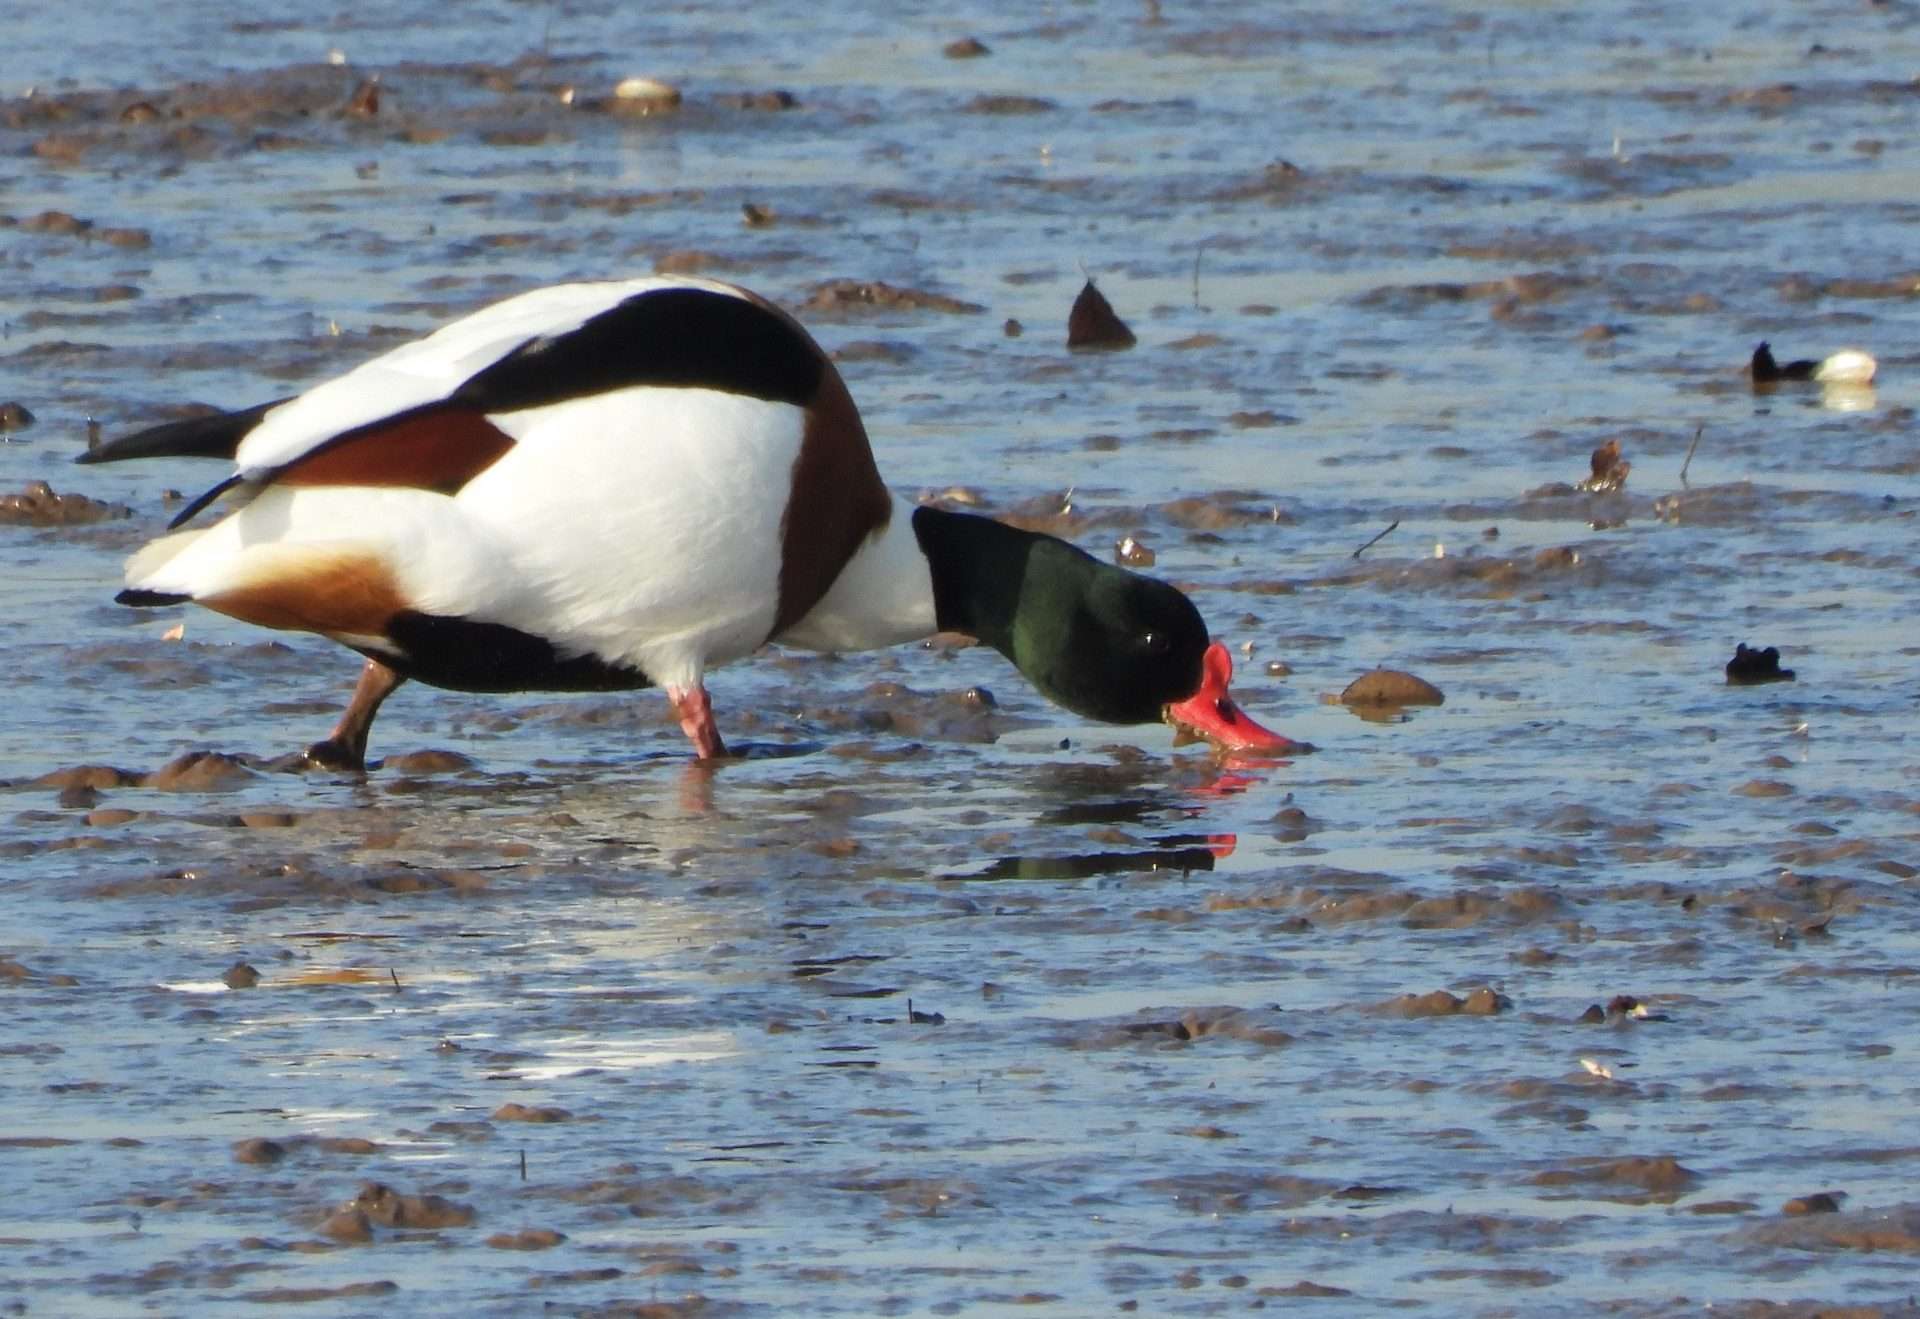 Shelduck by Kenneth at Combe cellars